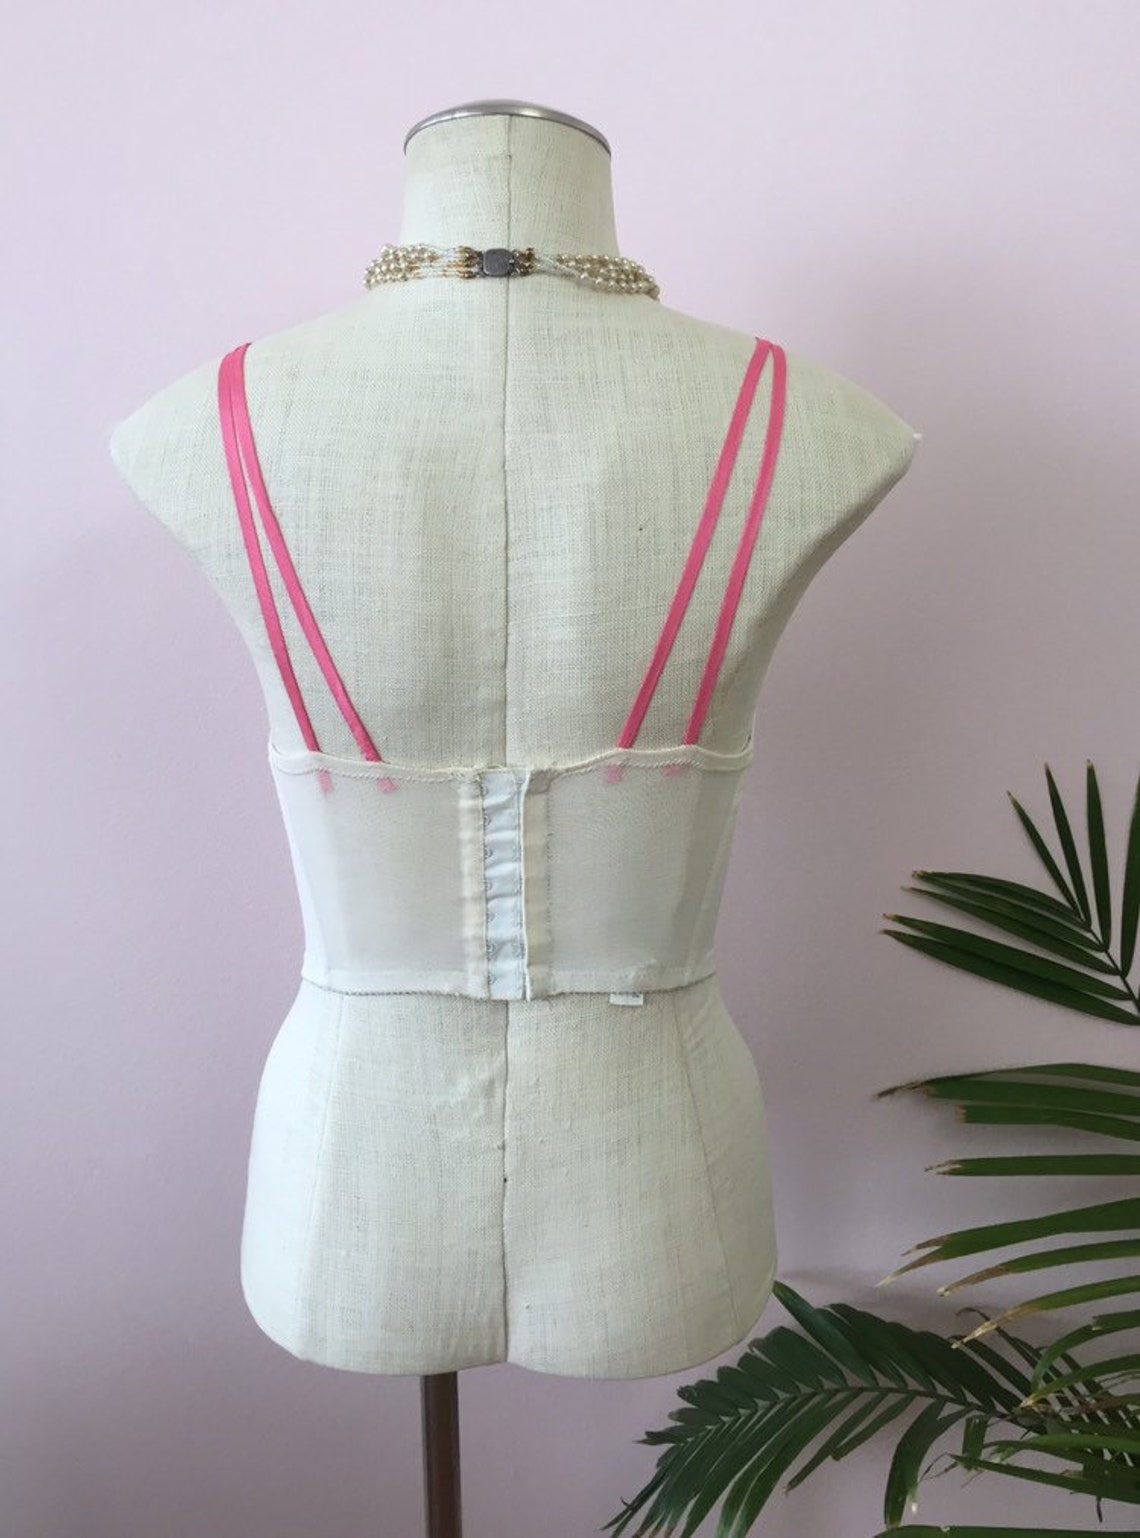 KITT Vintage Longline Bra White Lace Overwire Bustier Pink - Etsy Canada